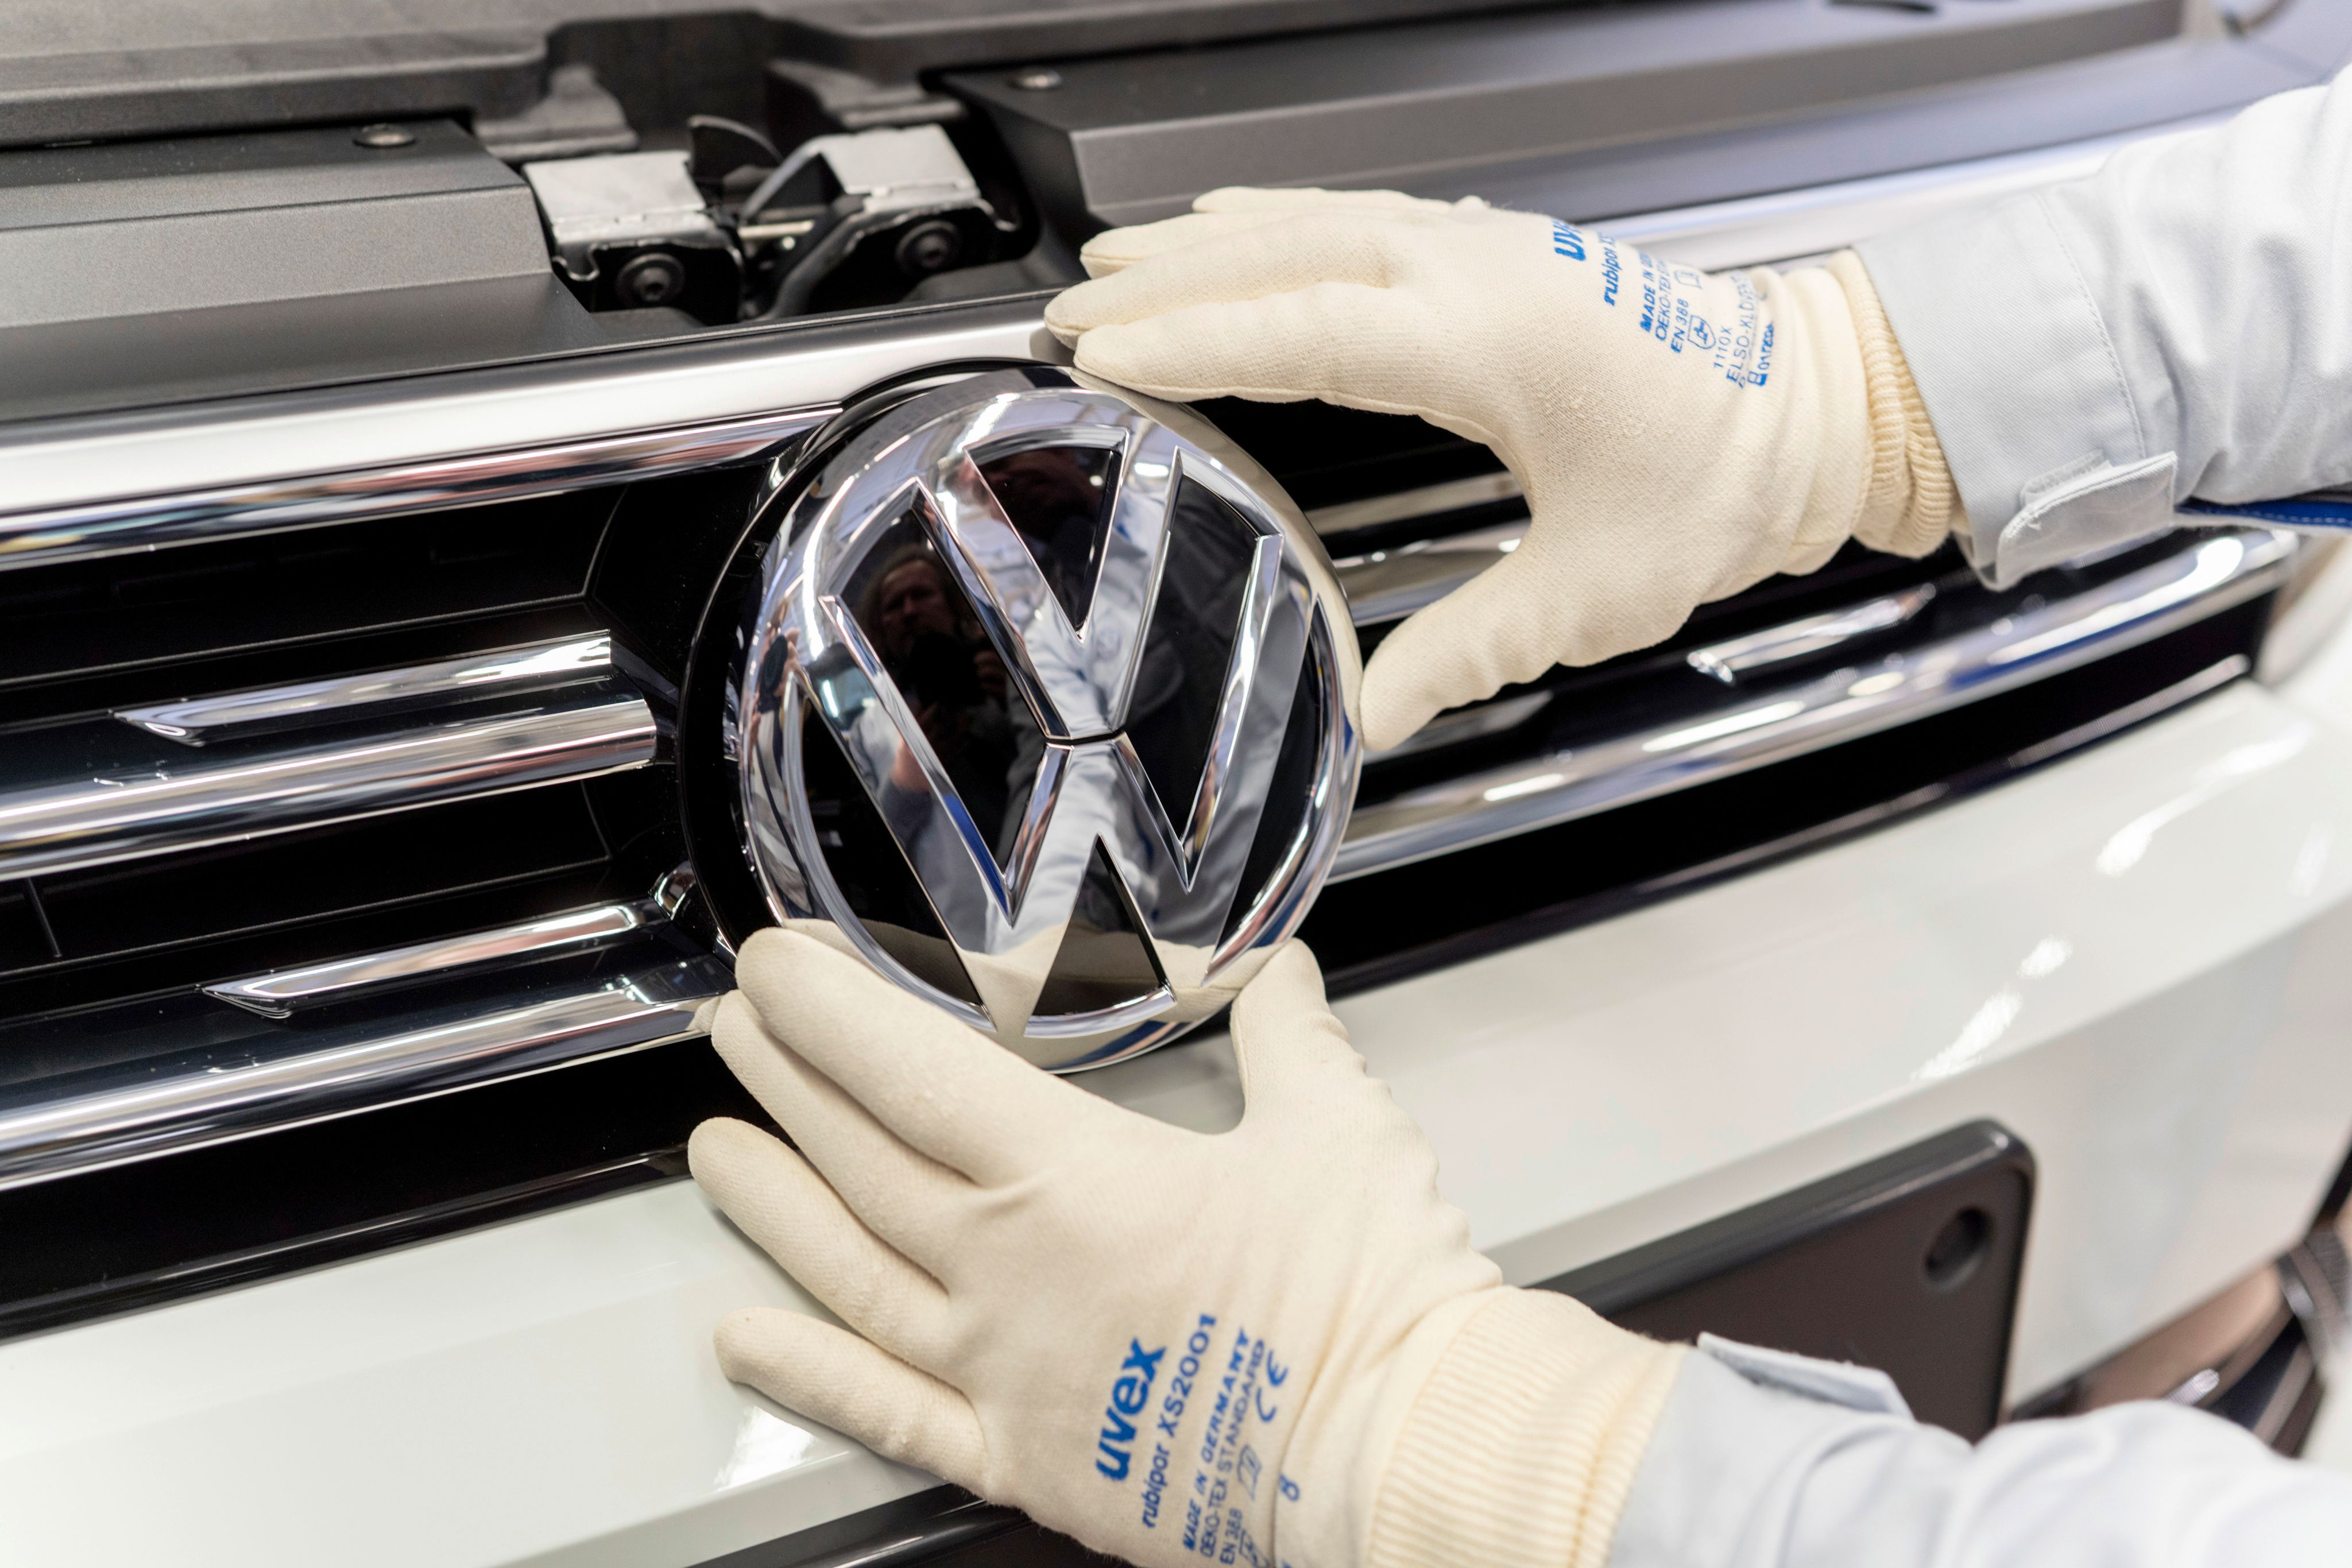 An employee puts the Volkswagen sign on a car.